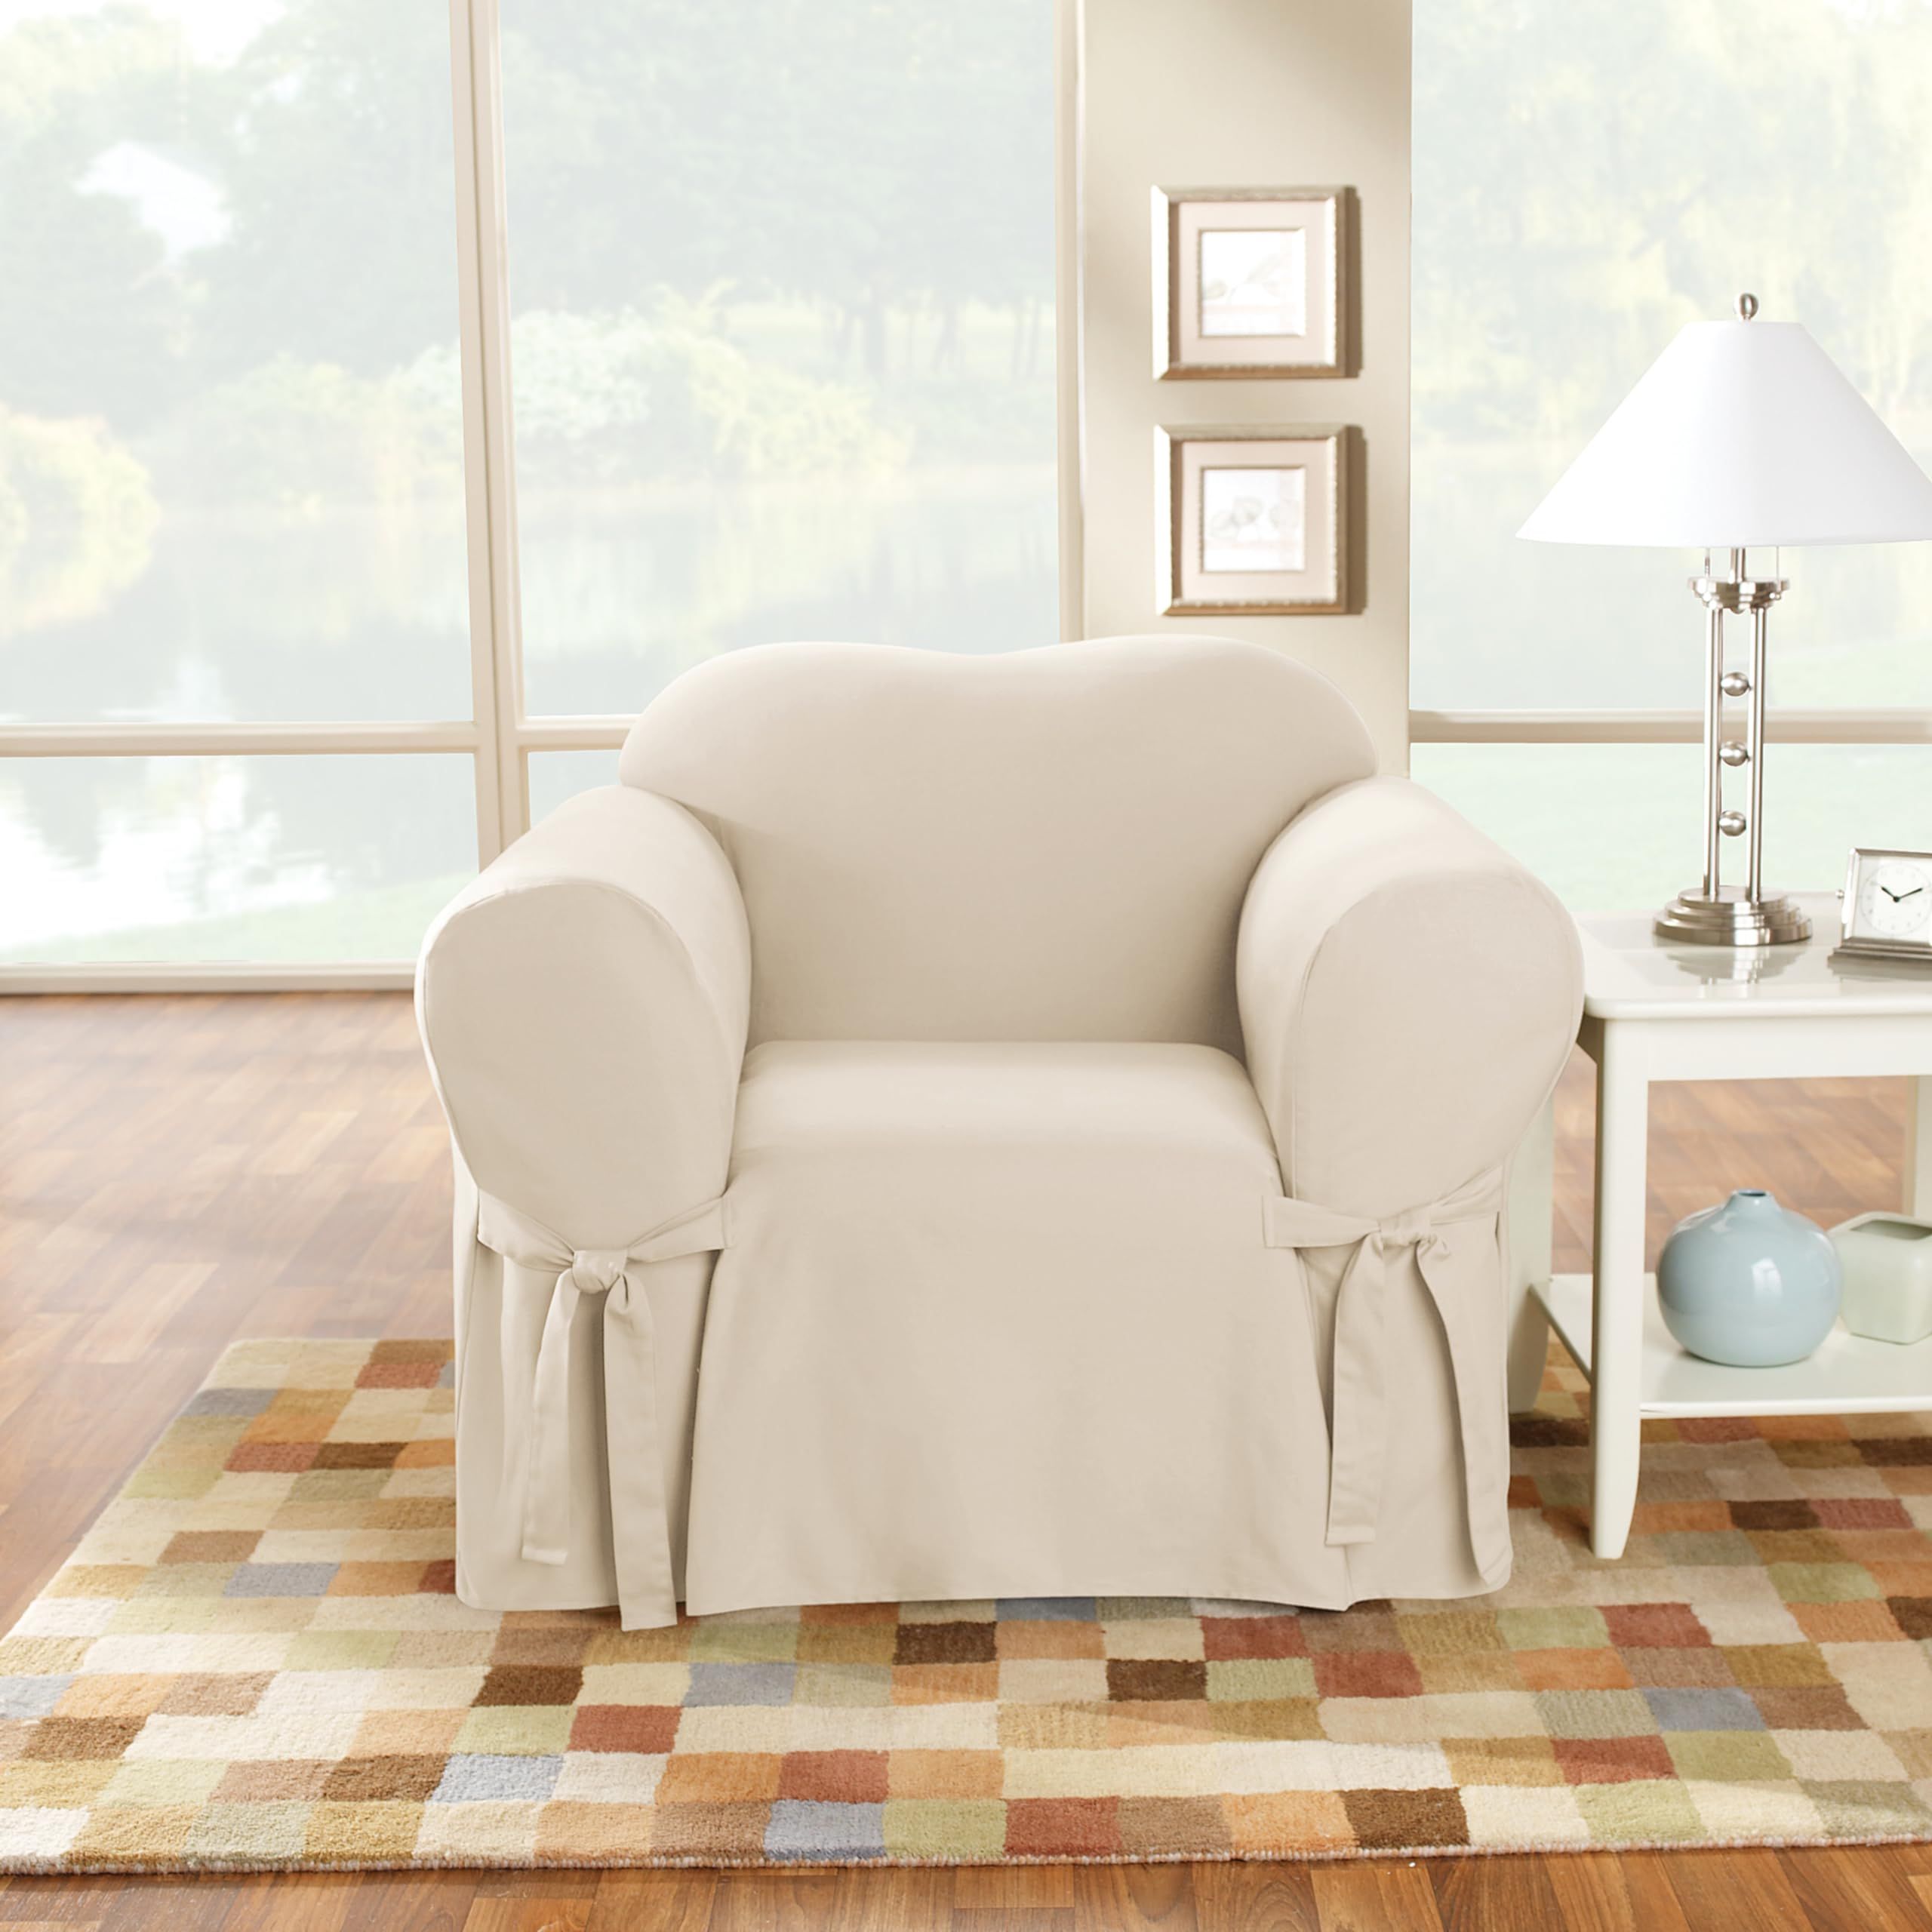 SureFit Duck 1 Piece Chair Slipcover in Natural | Amazon (US)